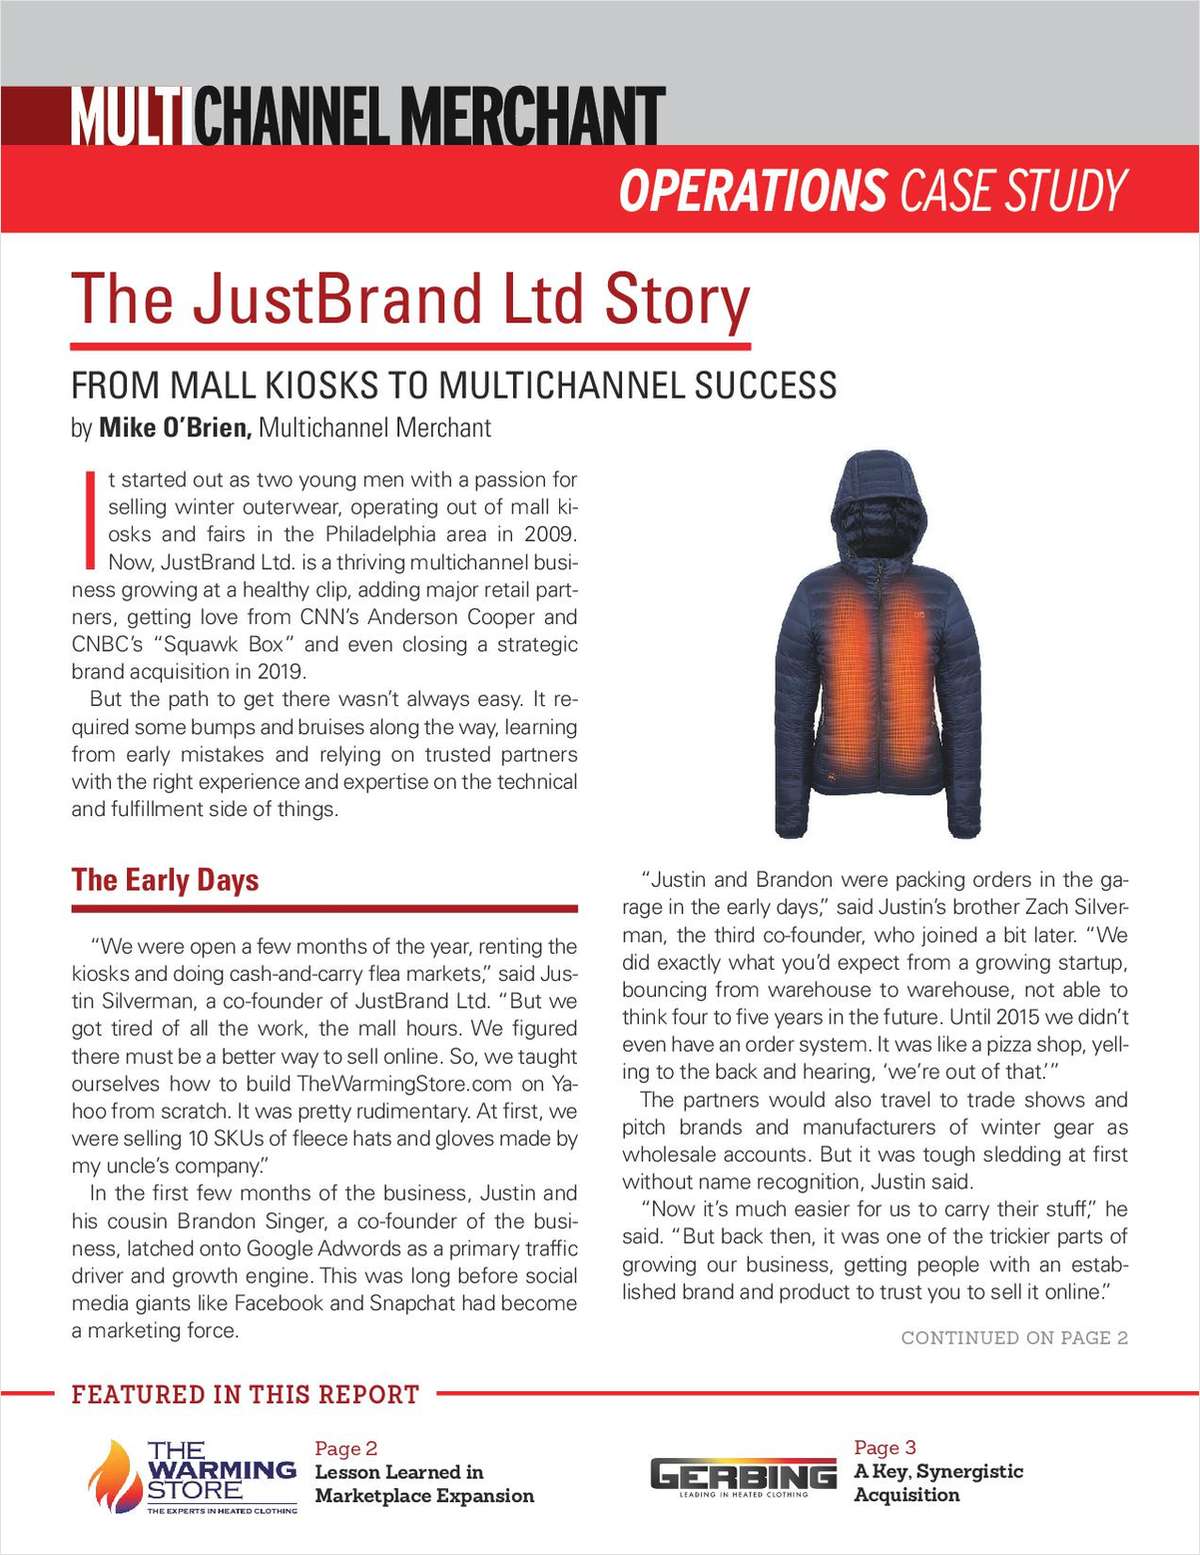 JustBrand Ltd: The Path to Multichannel Success